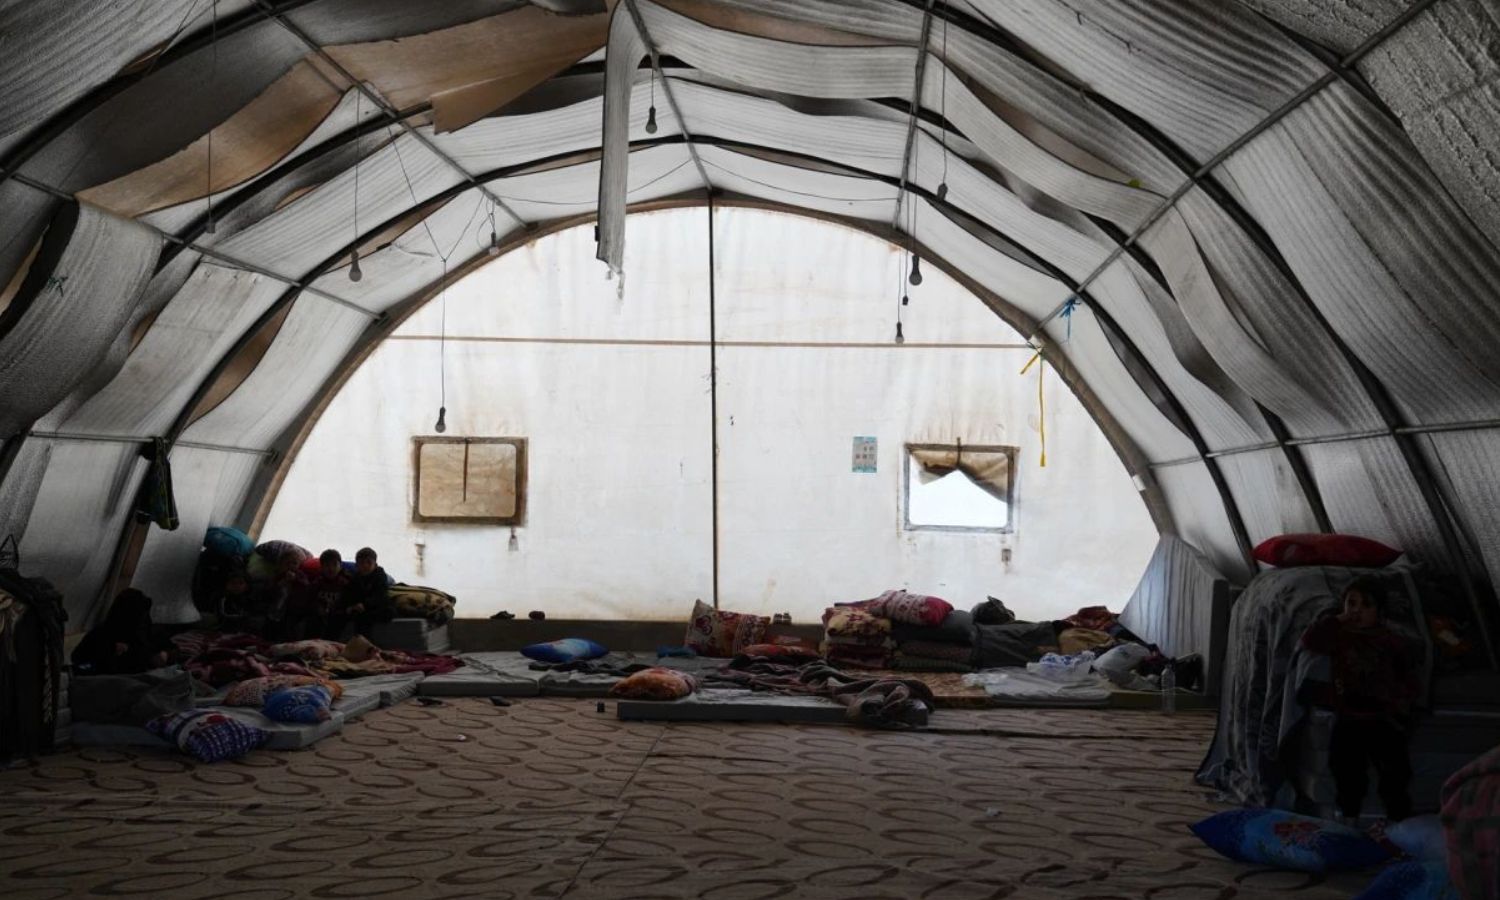 About 100 quake-affected families live in this tent in the Maarat Tamsrin town in Idlib countryside - February 21, 2023 (OCHA)